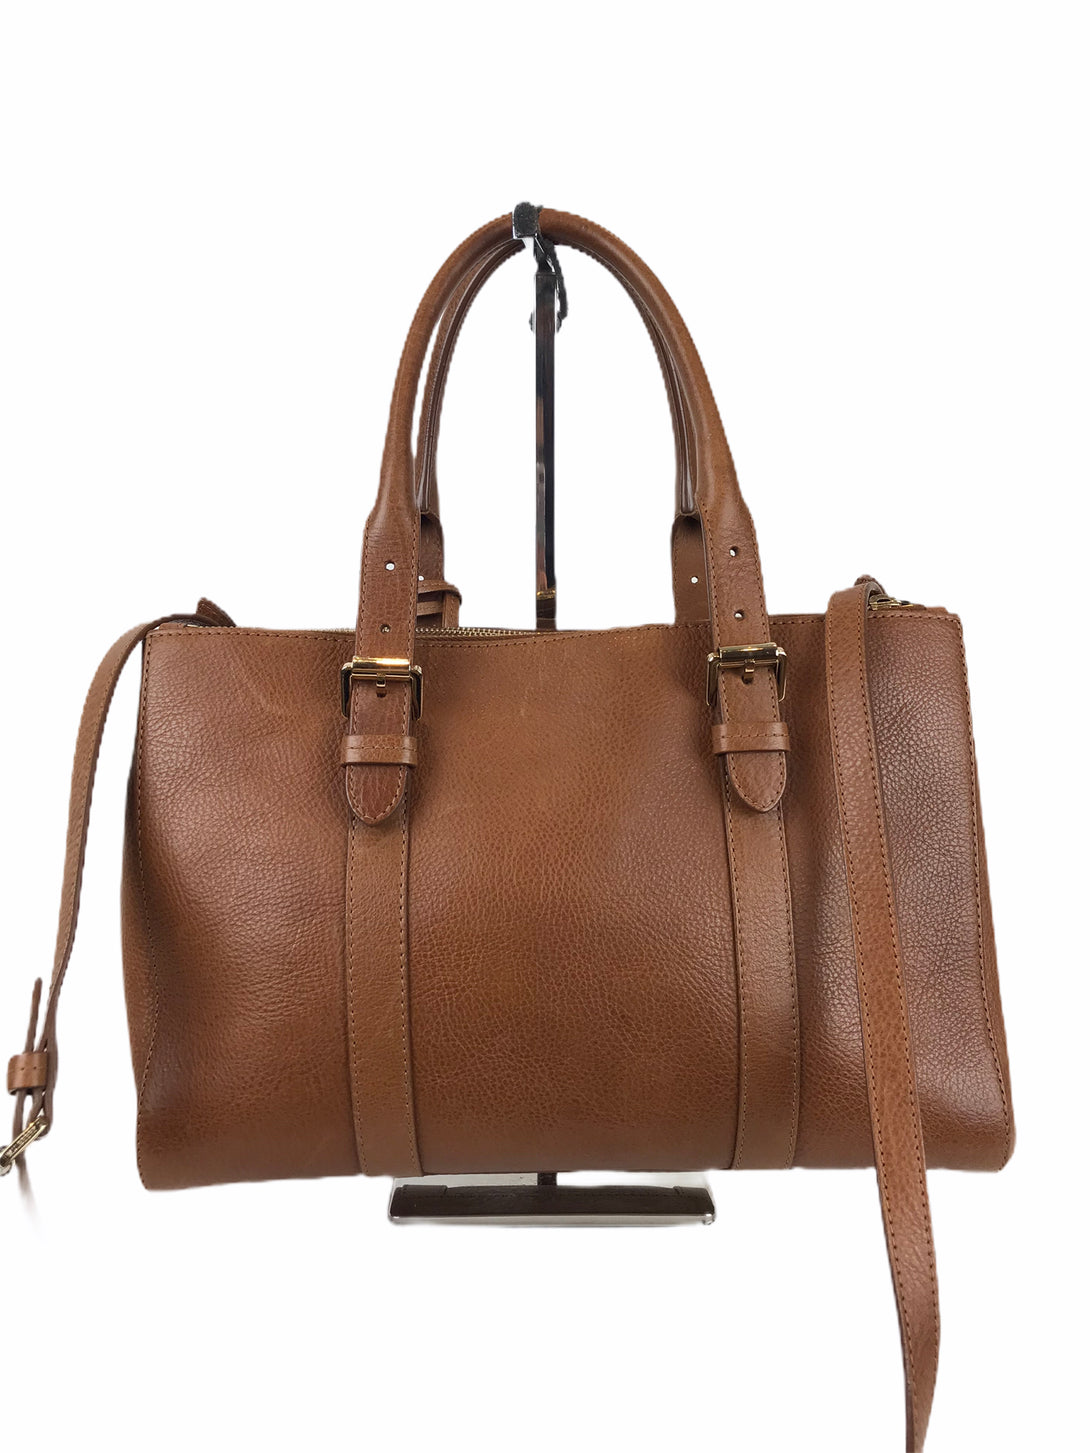 Mulberry Oak Leather Tote - As Seen on Instagram 26/08/2020 - Siopaella Designer Exchange